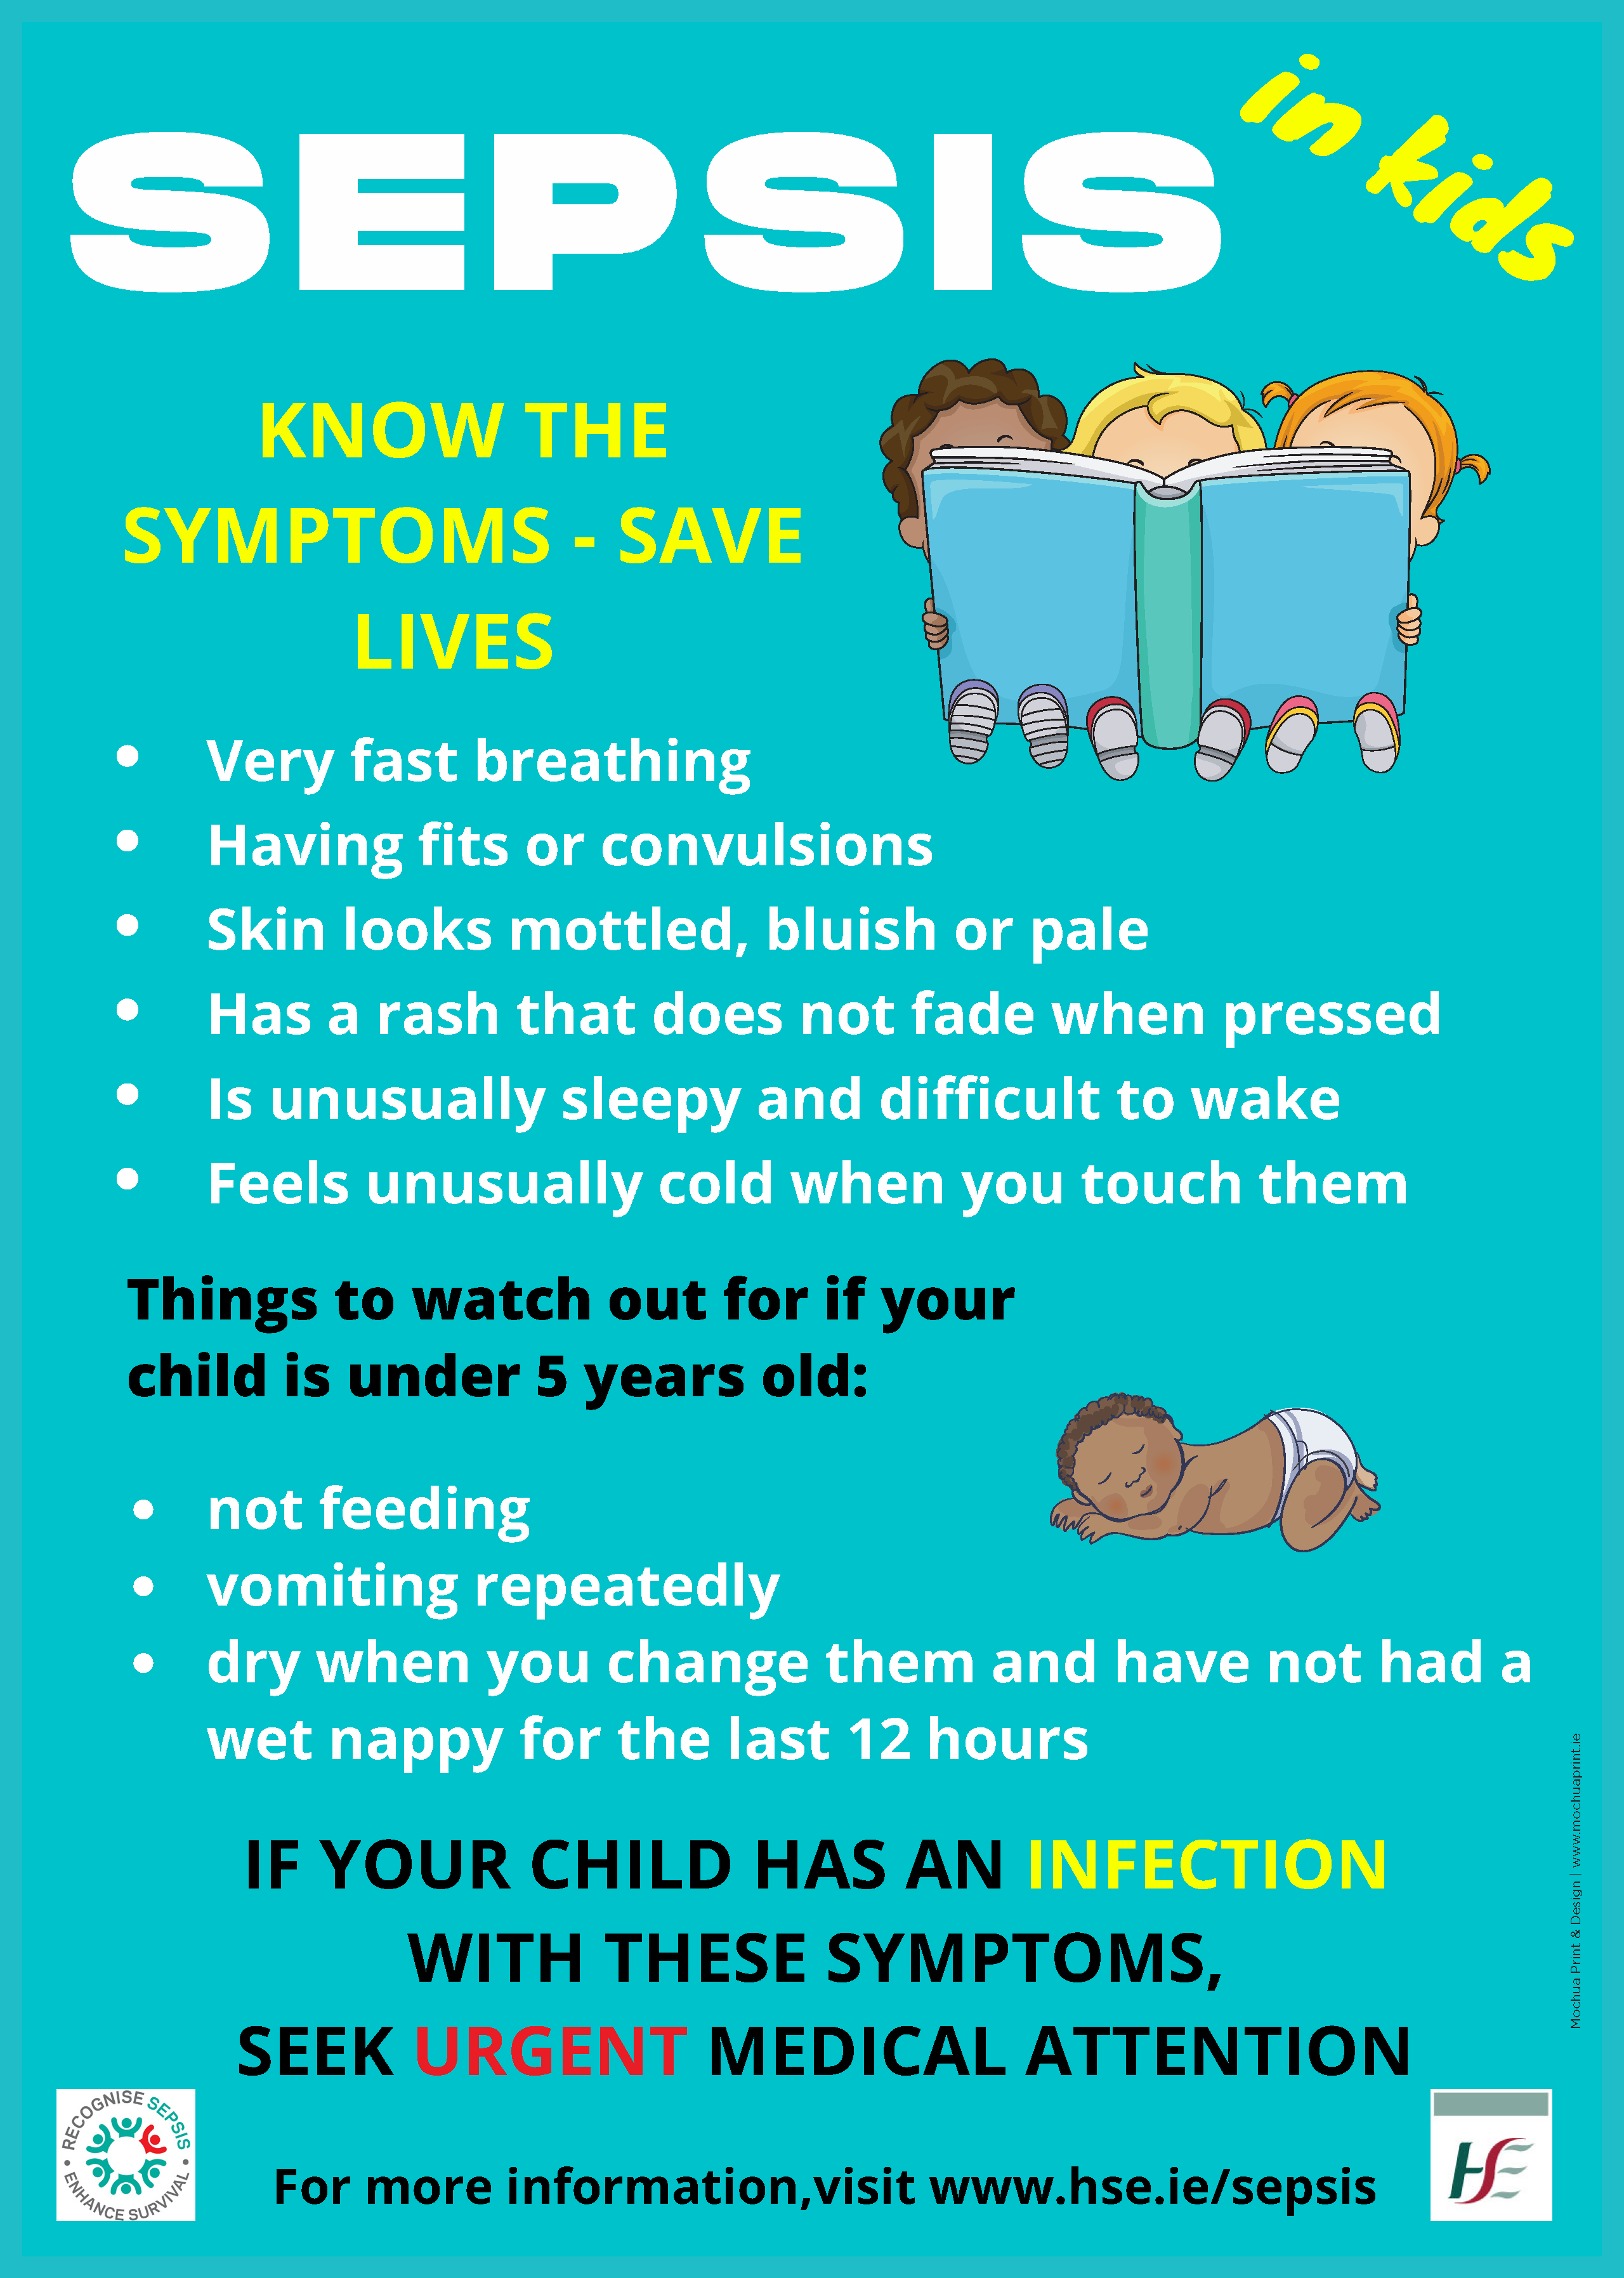 National Office of Clinical Audit on X: In light of recent media coverage,  NOCA would like to promote sepsis awareness. Below is a poster from the HSE  that will help you identify